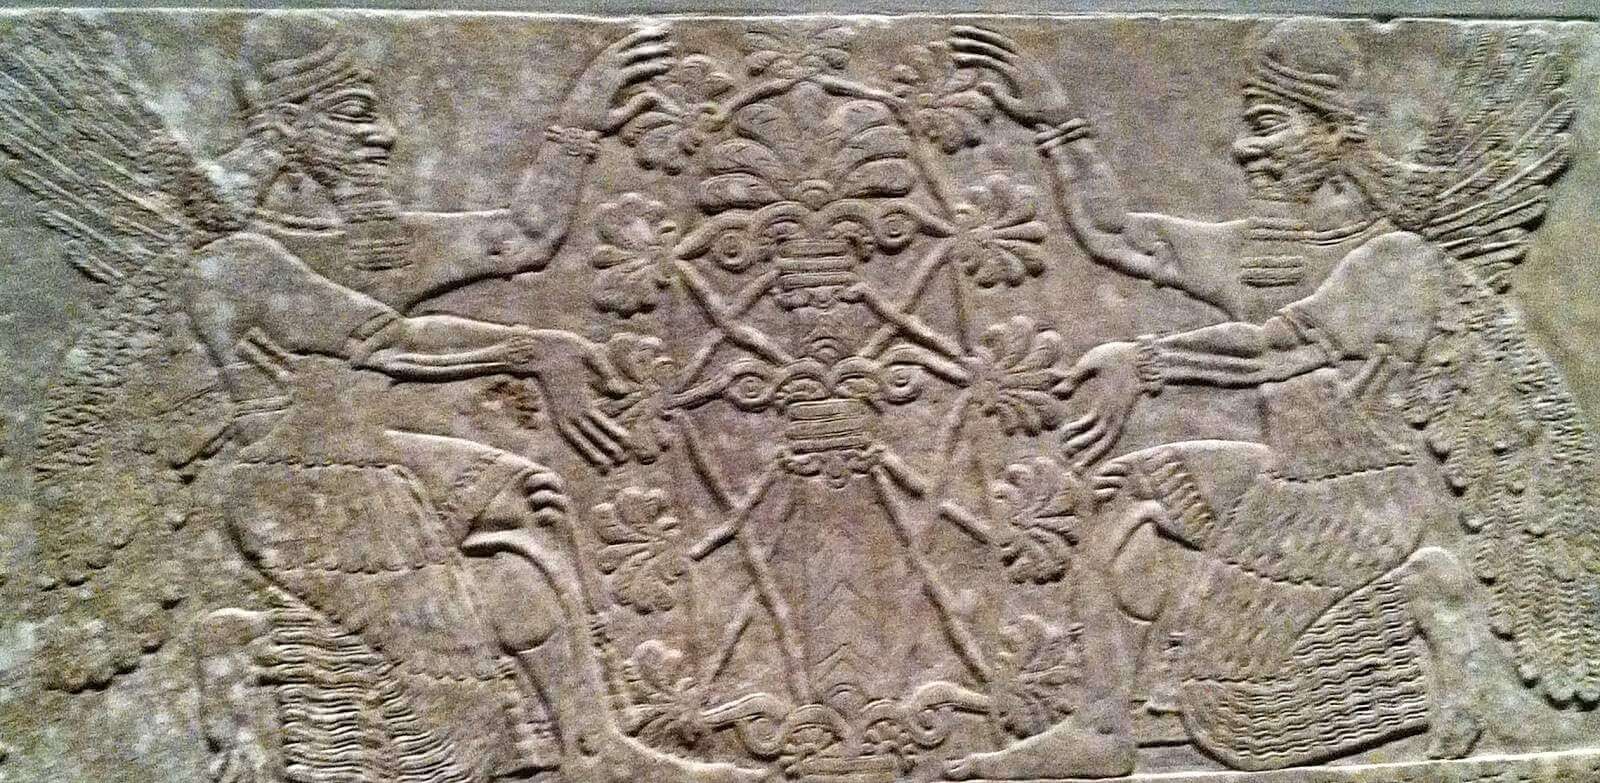 Assyrian Sacred tree relief in stone